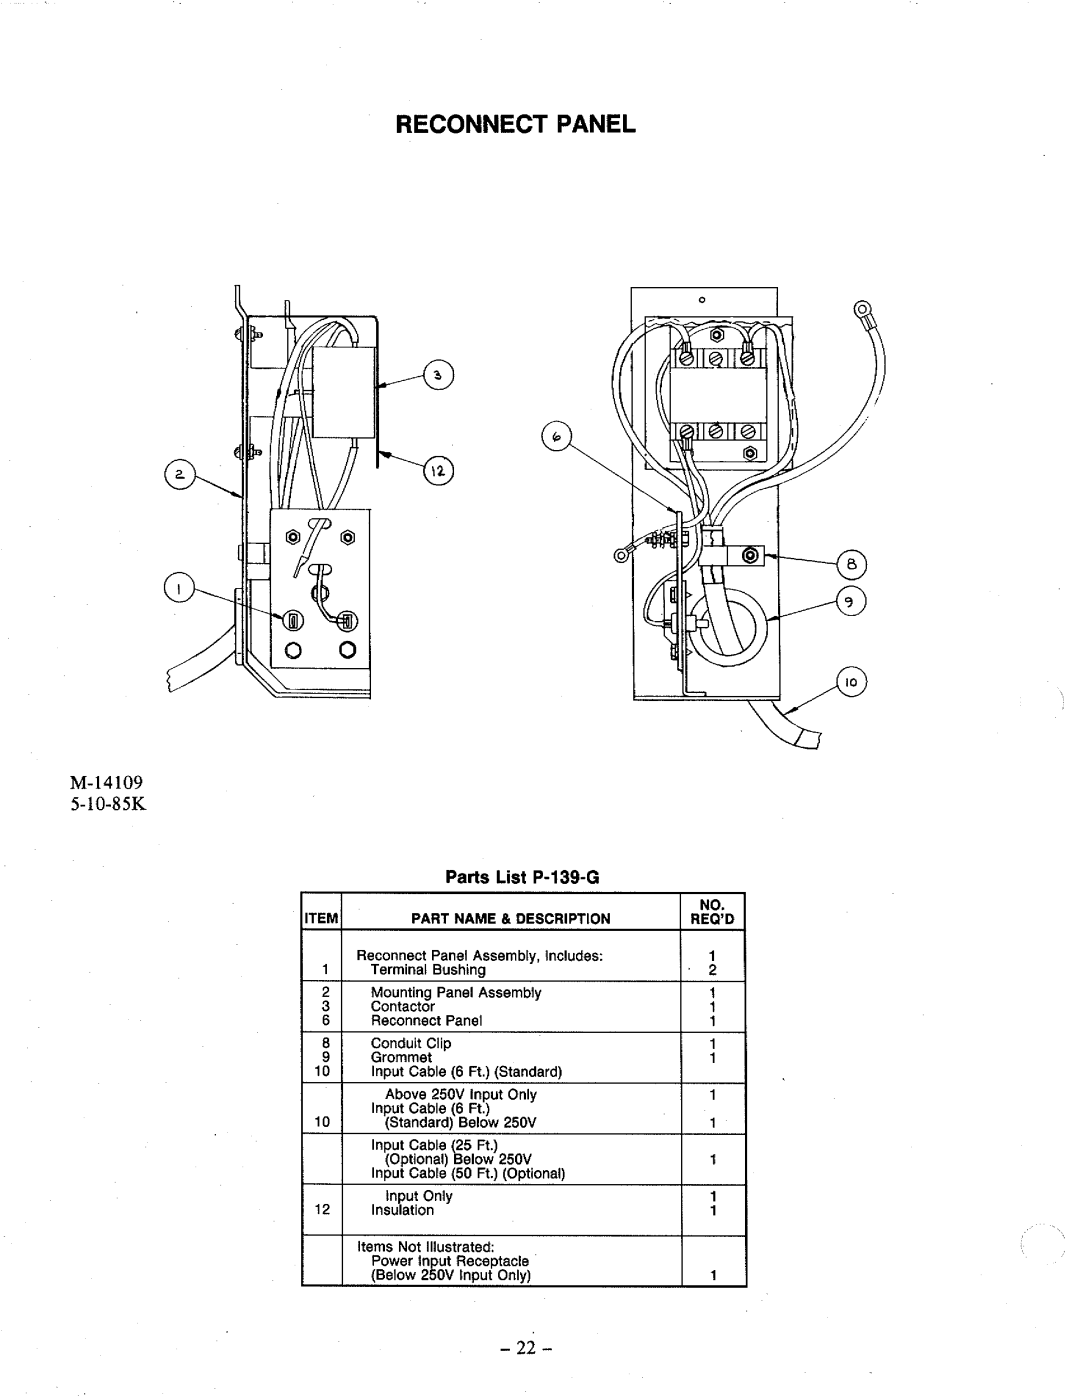 Lincoln Electric SP-200 manual 